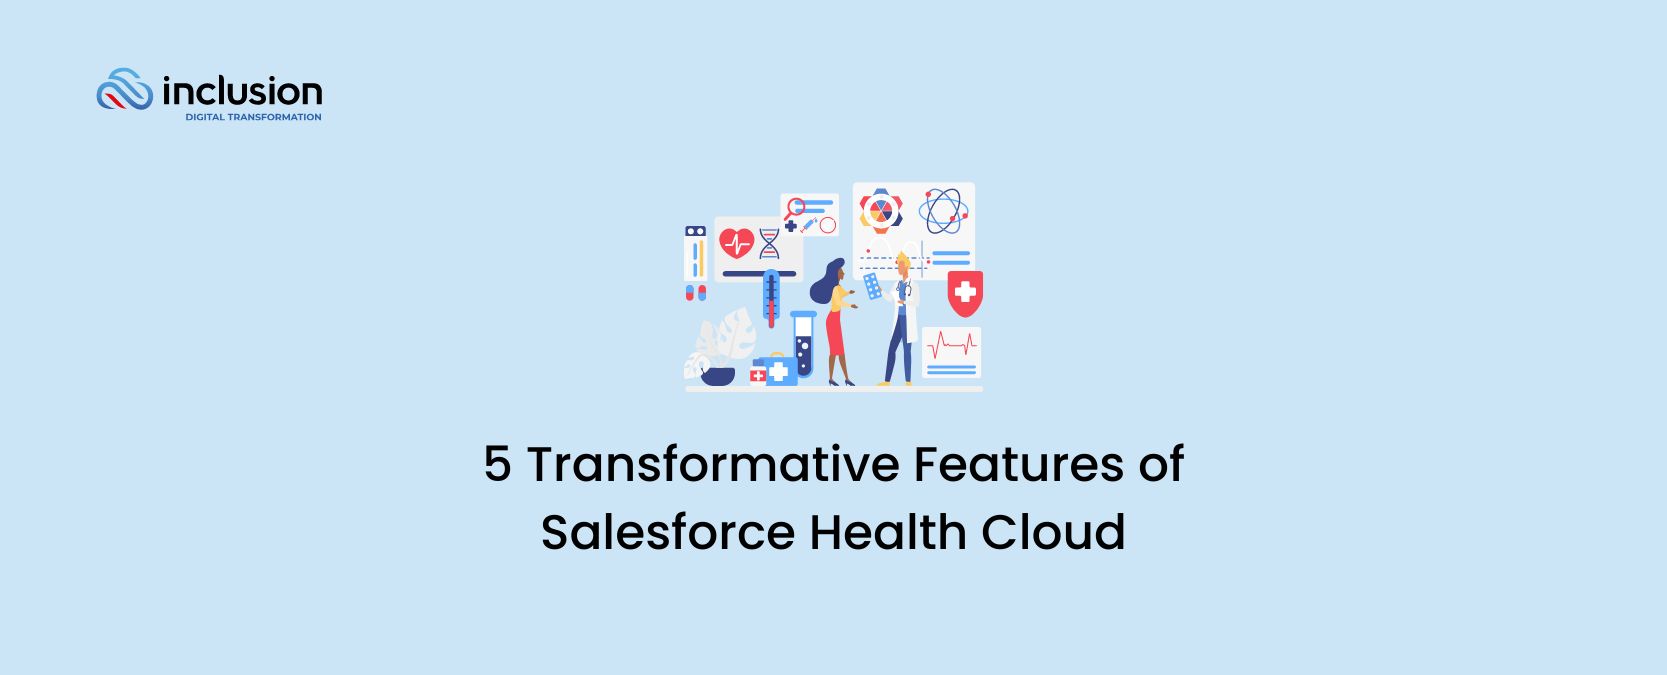 5 Transformative Features of Salesforce Health Cloud for Modern Healthcare